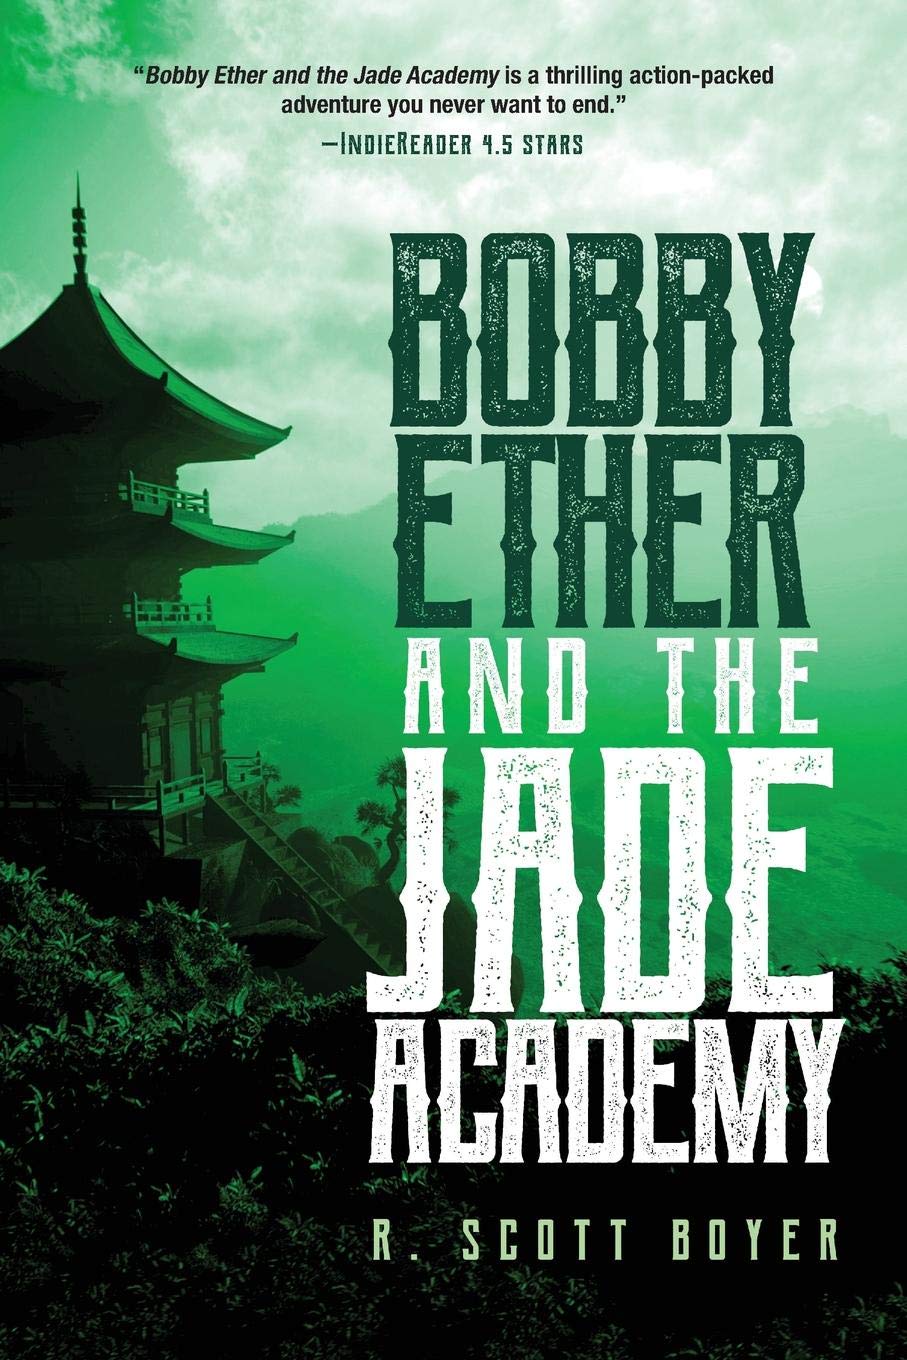 Bobby Ether and The Jade Academy